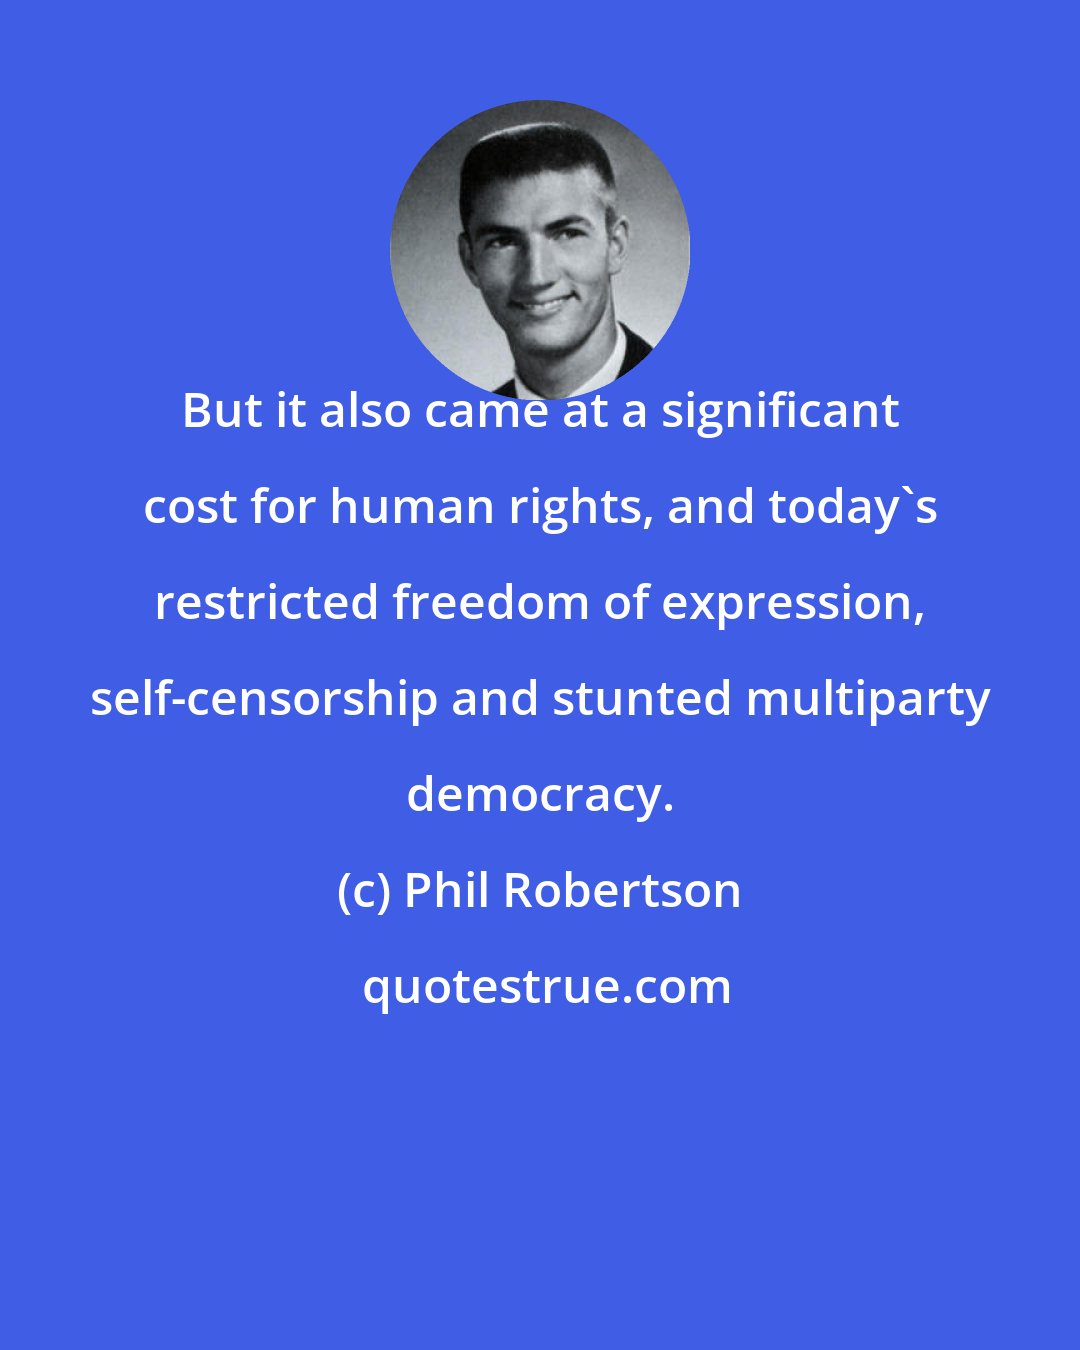 Phil Robertson: But it also came at a significant cost for human rights, and today's restricted freedom of expression, self-censorship and stunted multiparty democracy.